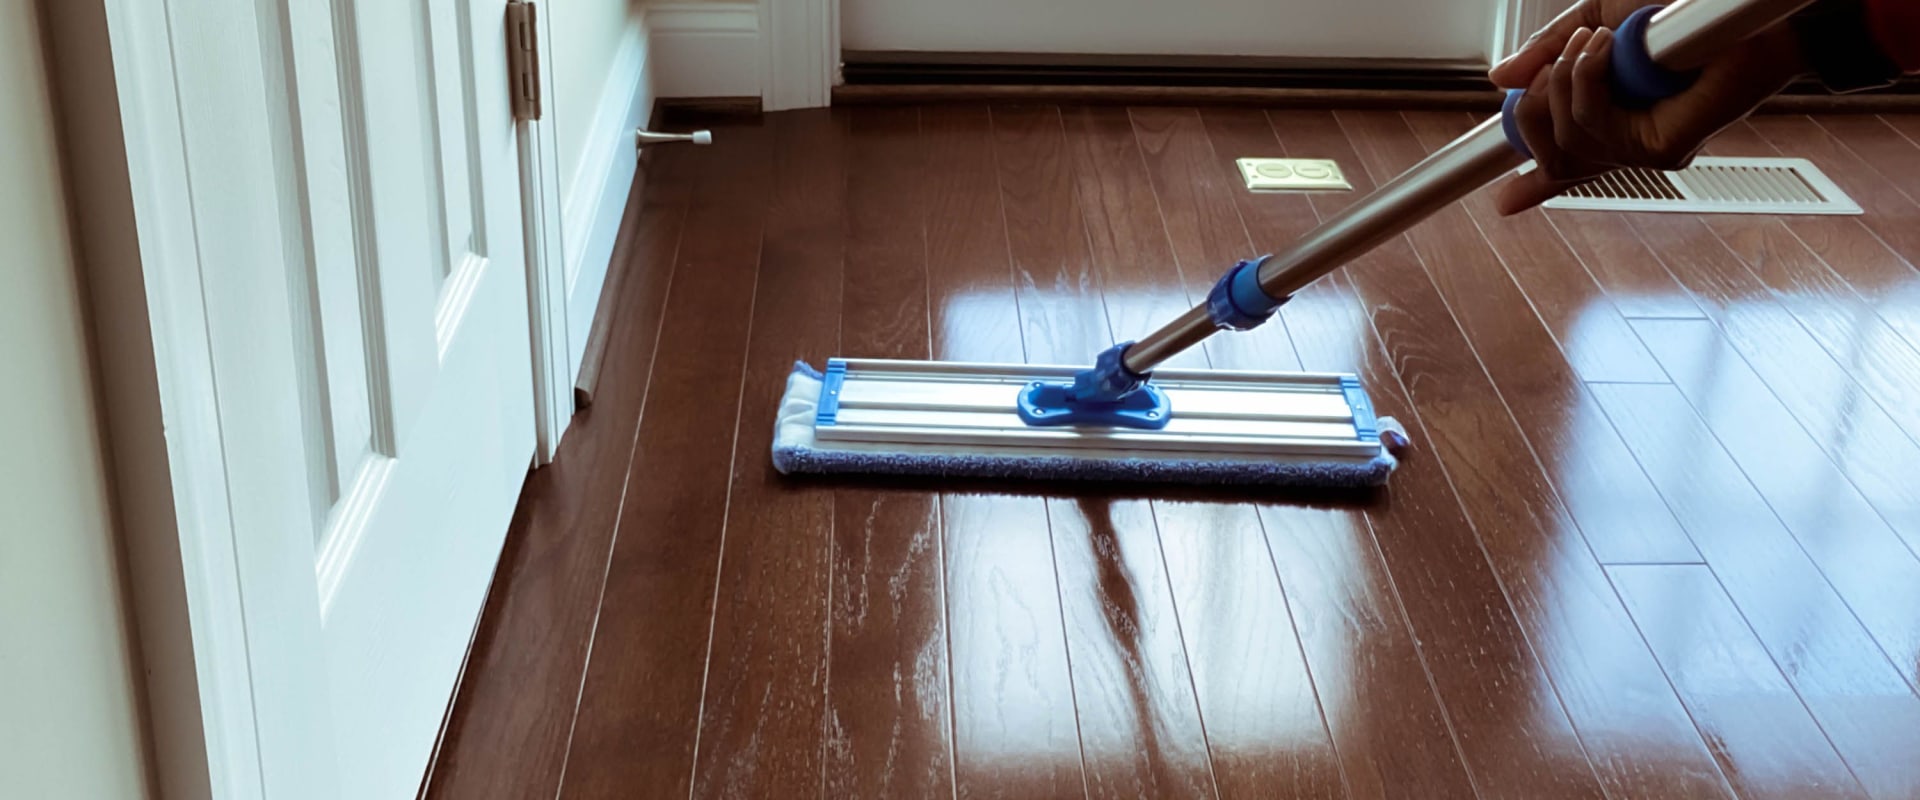 How do you clean hardwood floors that haven t been cleaned in years?